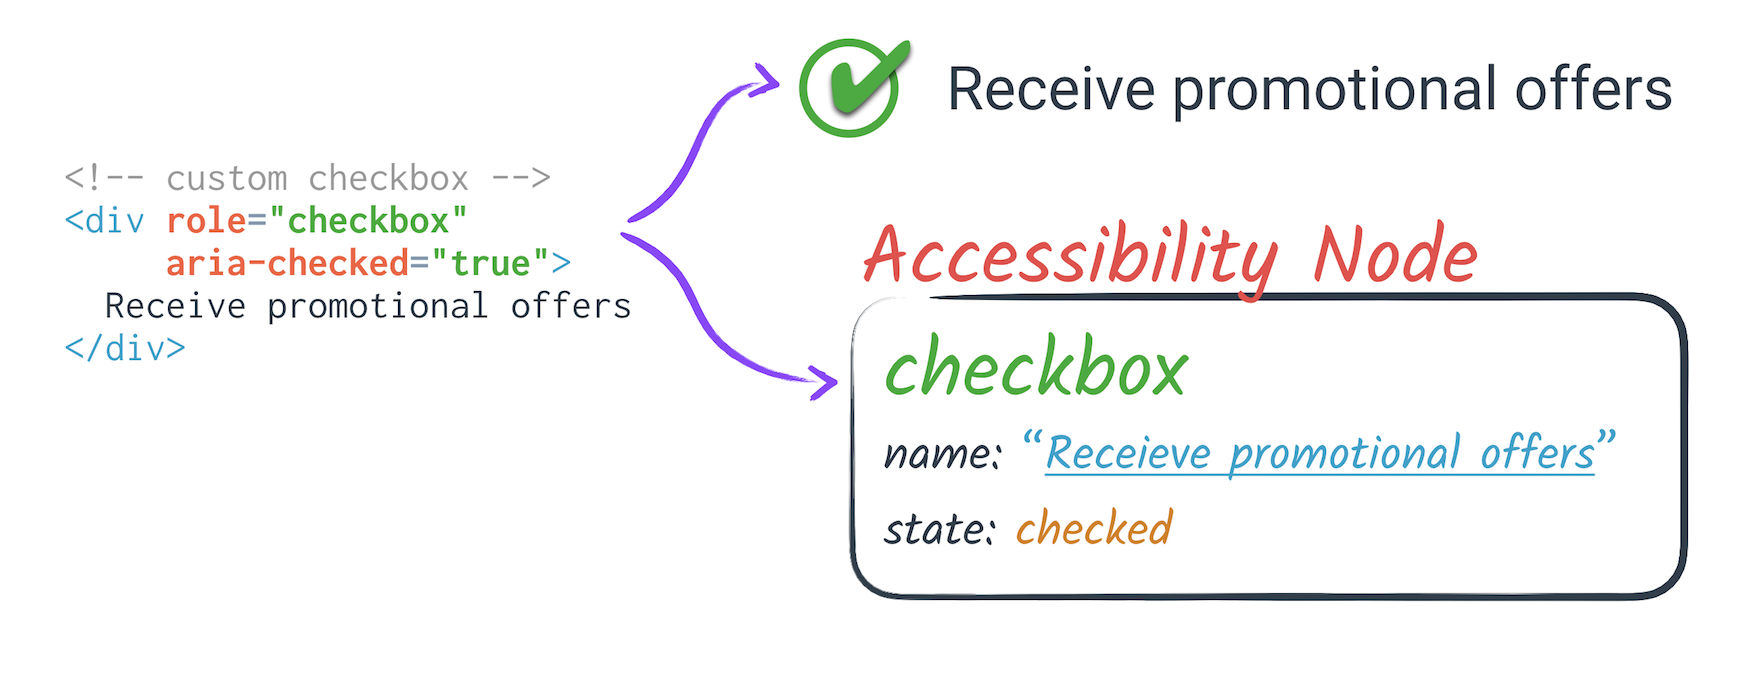 Image showing how a div with role=checkbox might simultaneously be drawn as a custom checkbox, while mapping onto a native chcekbox in the accessibility API.